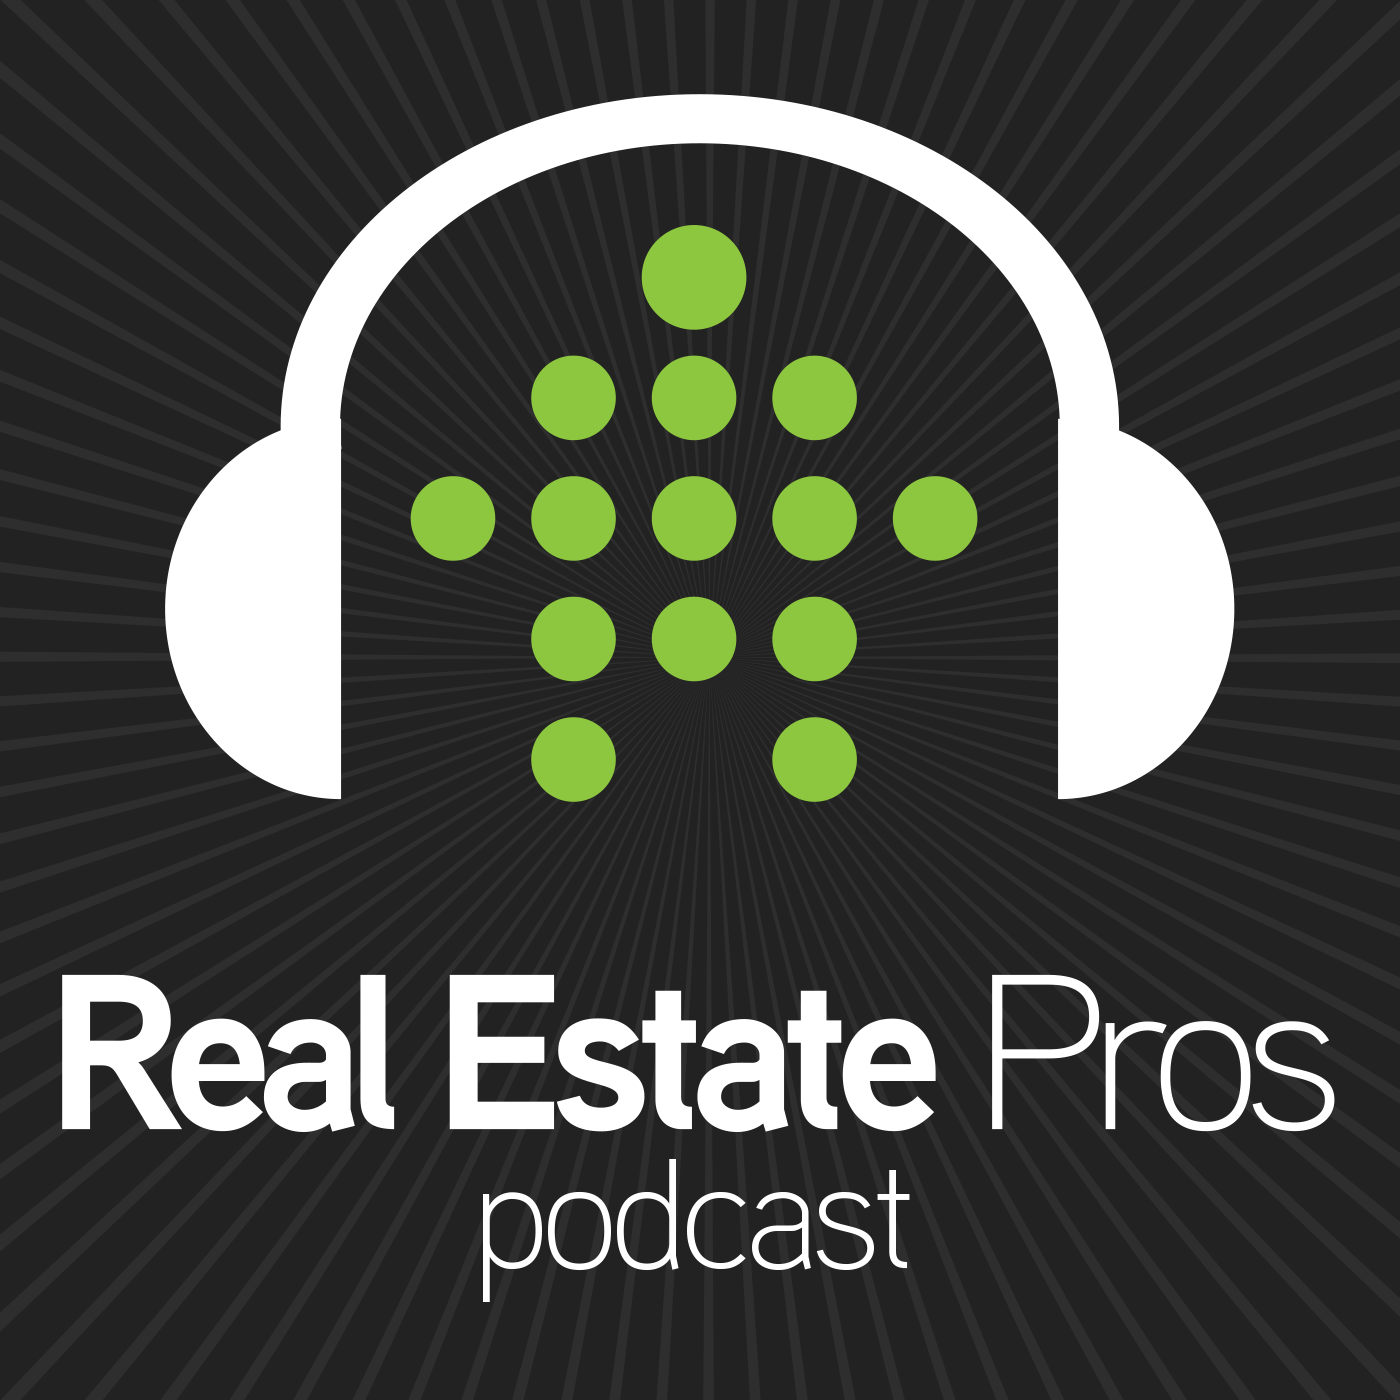 117: Josh Cobb: Why Some Real Estate Agents Stand Out Online More Than Others